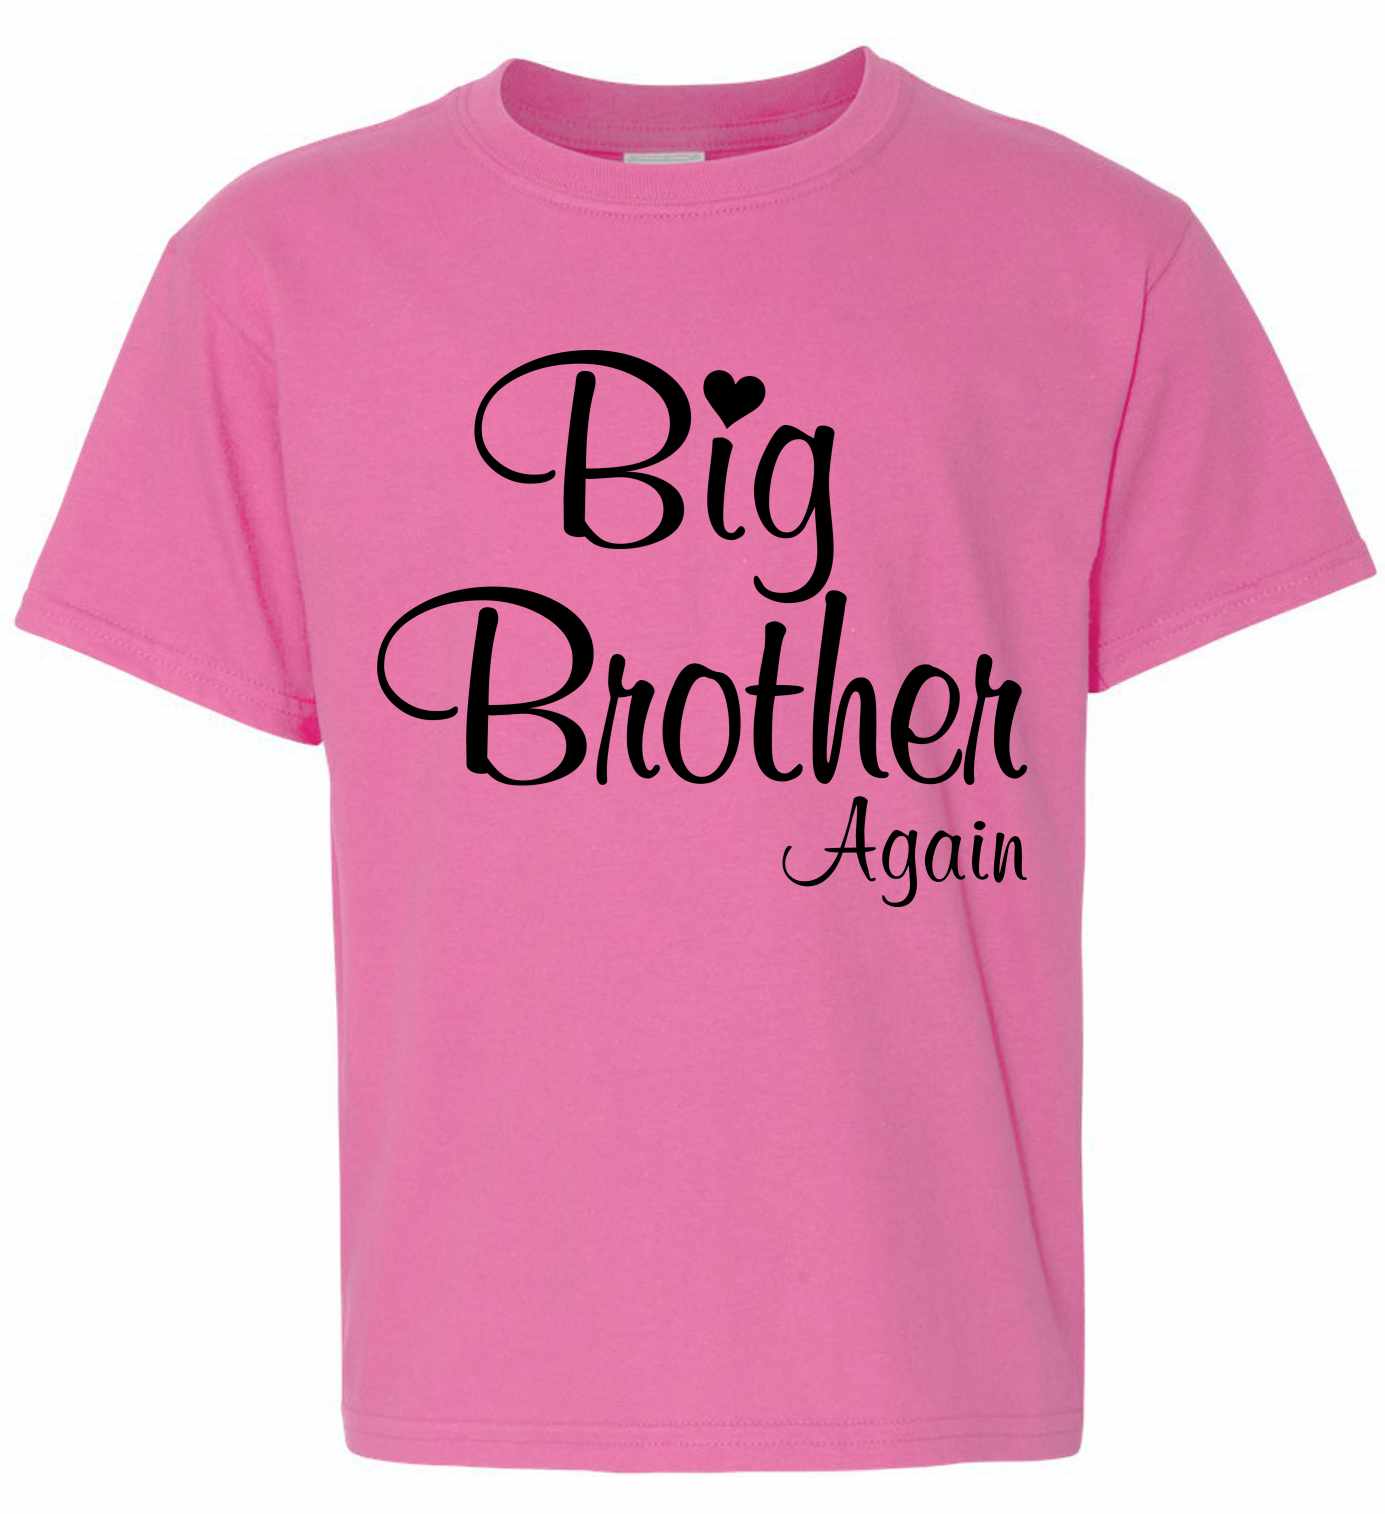 Big Brother Again on Kids T-Shirt (#1337-201)